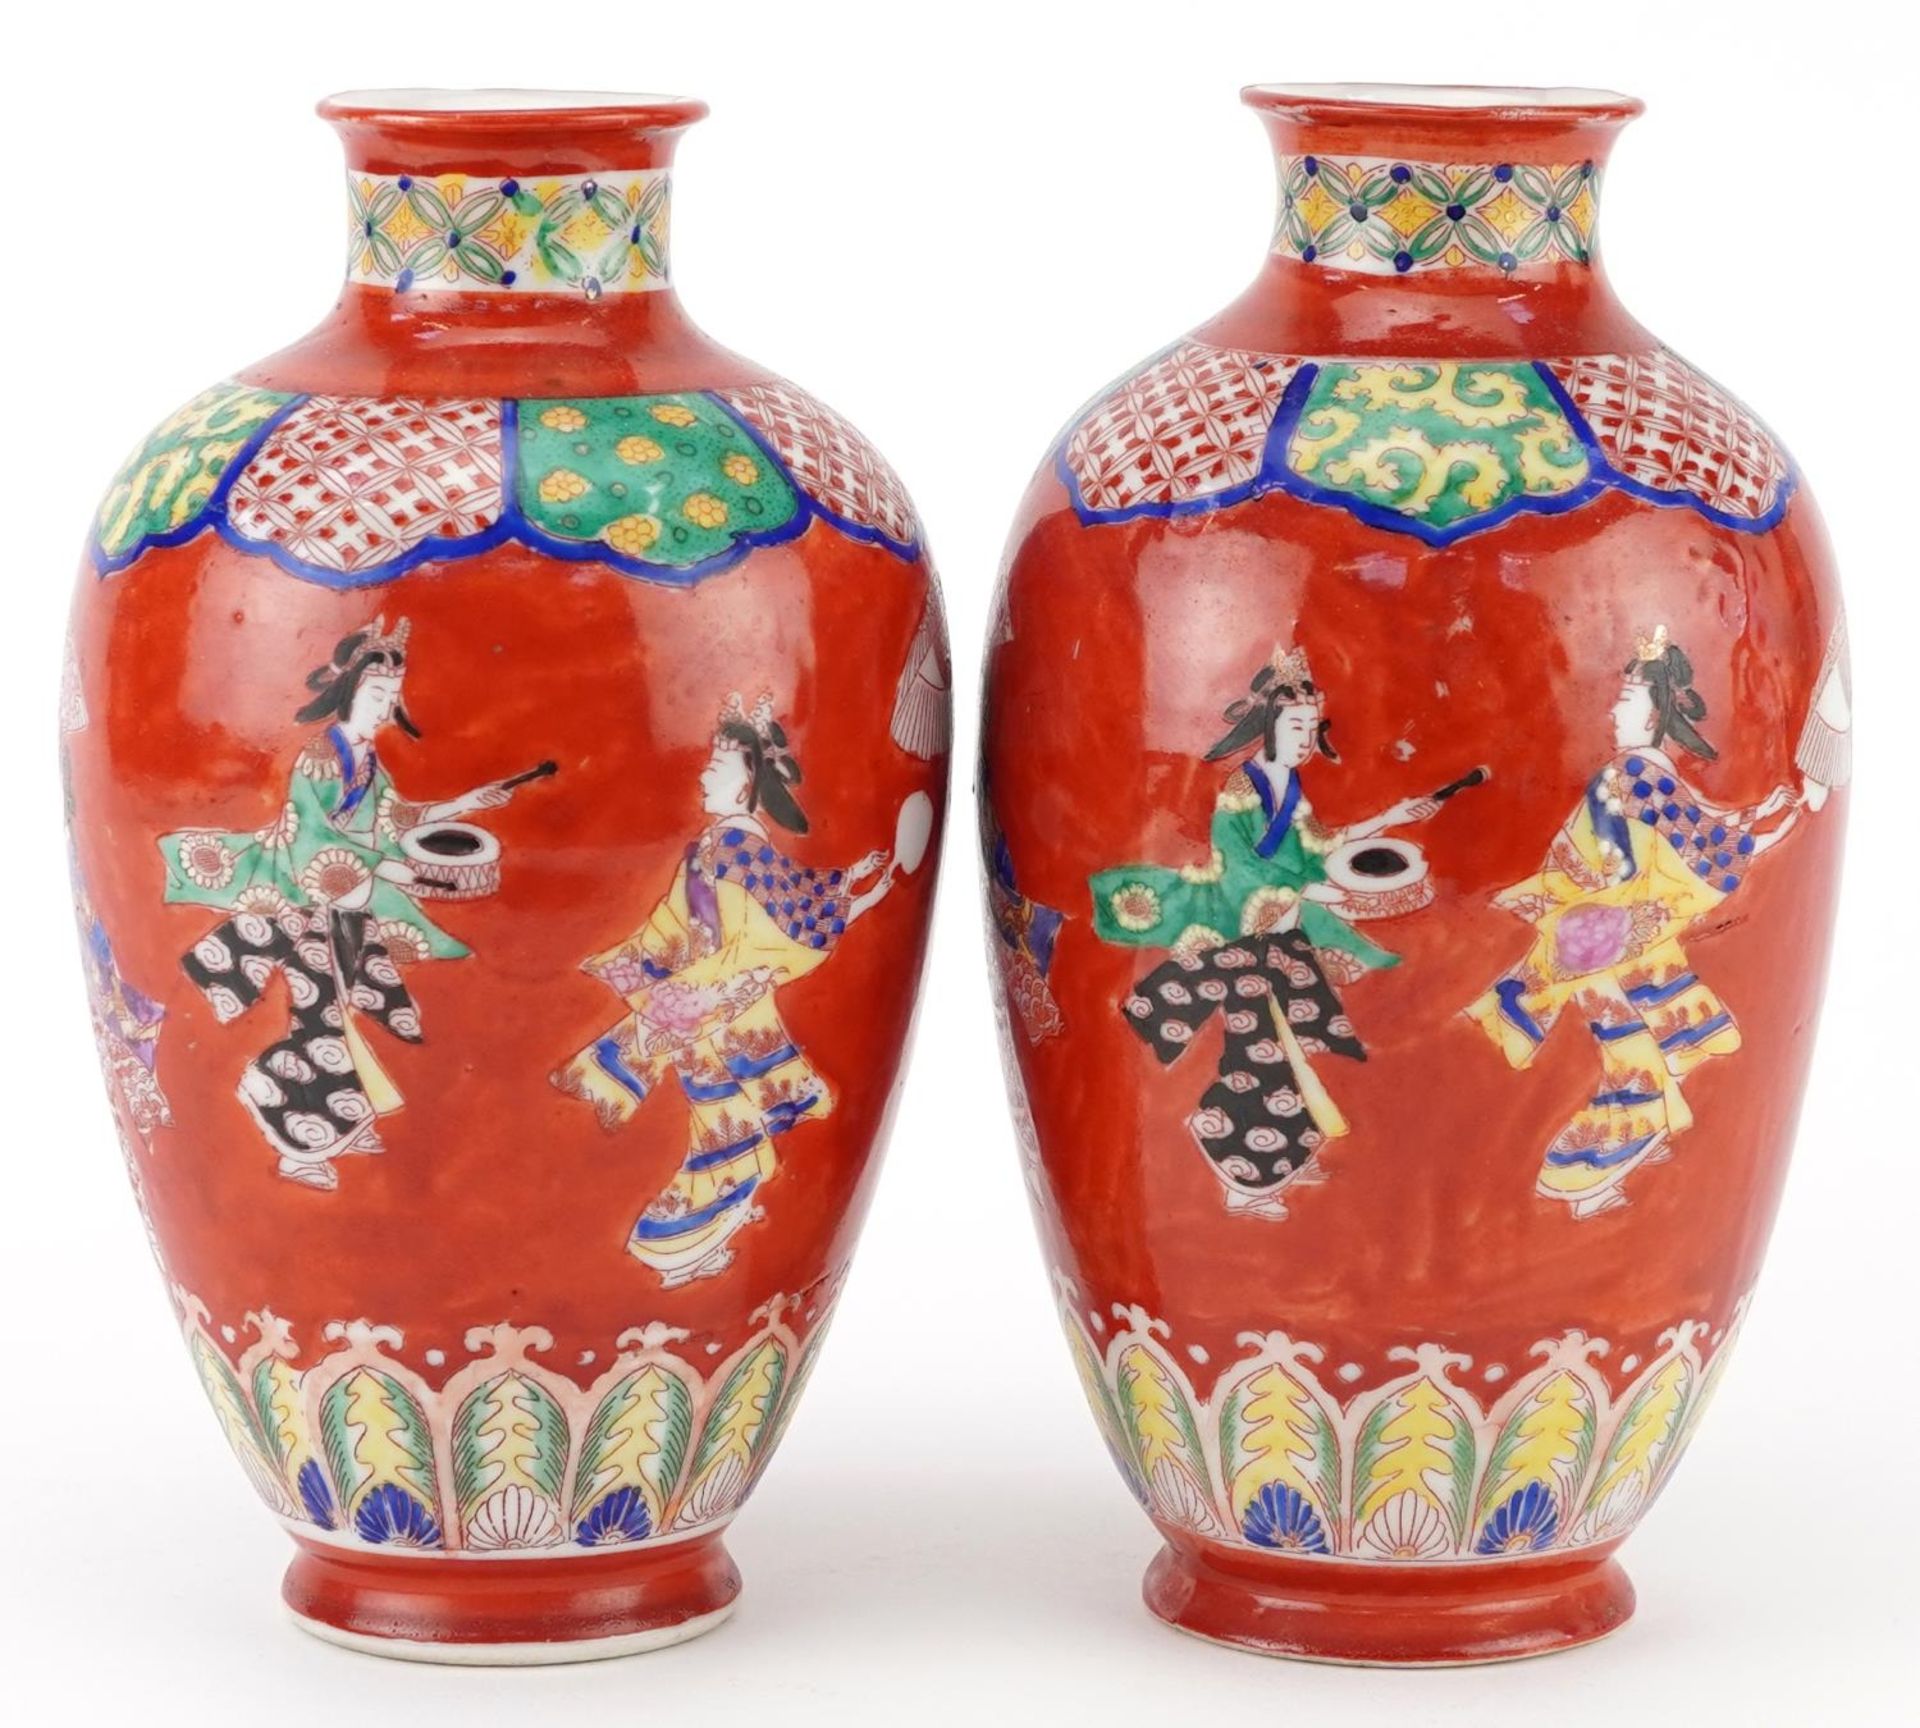 Pair of Japanese iron red ground porcelain vases hand painted with a continuous band of Geishas - Image 4 of 6